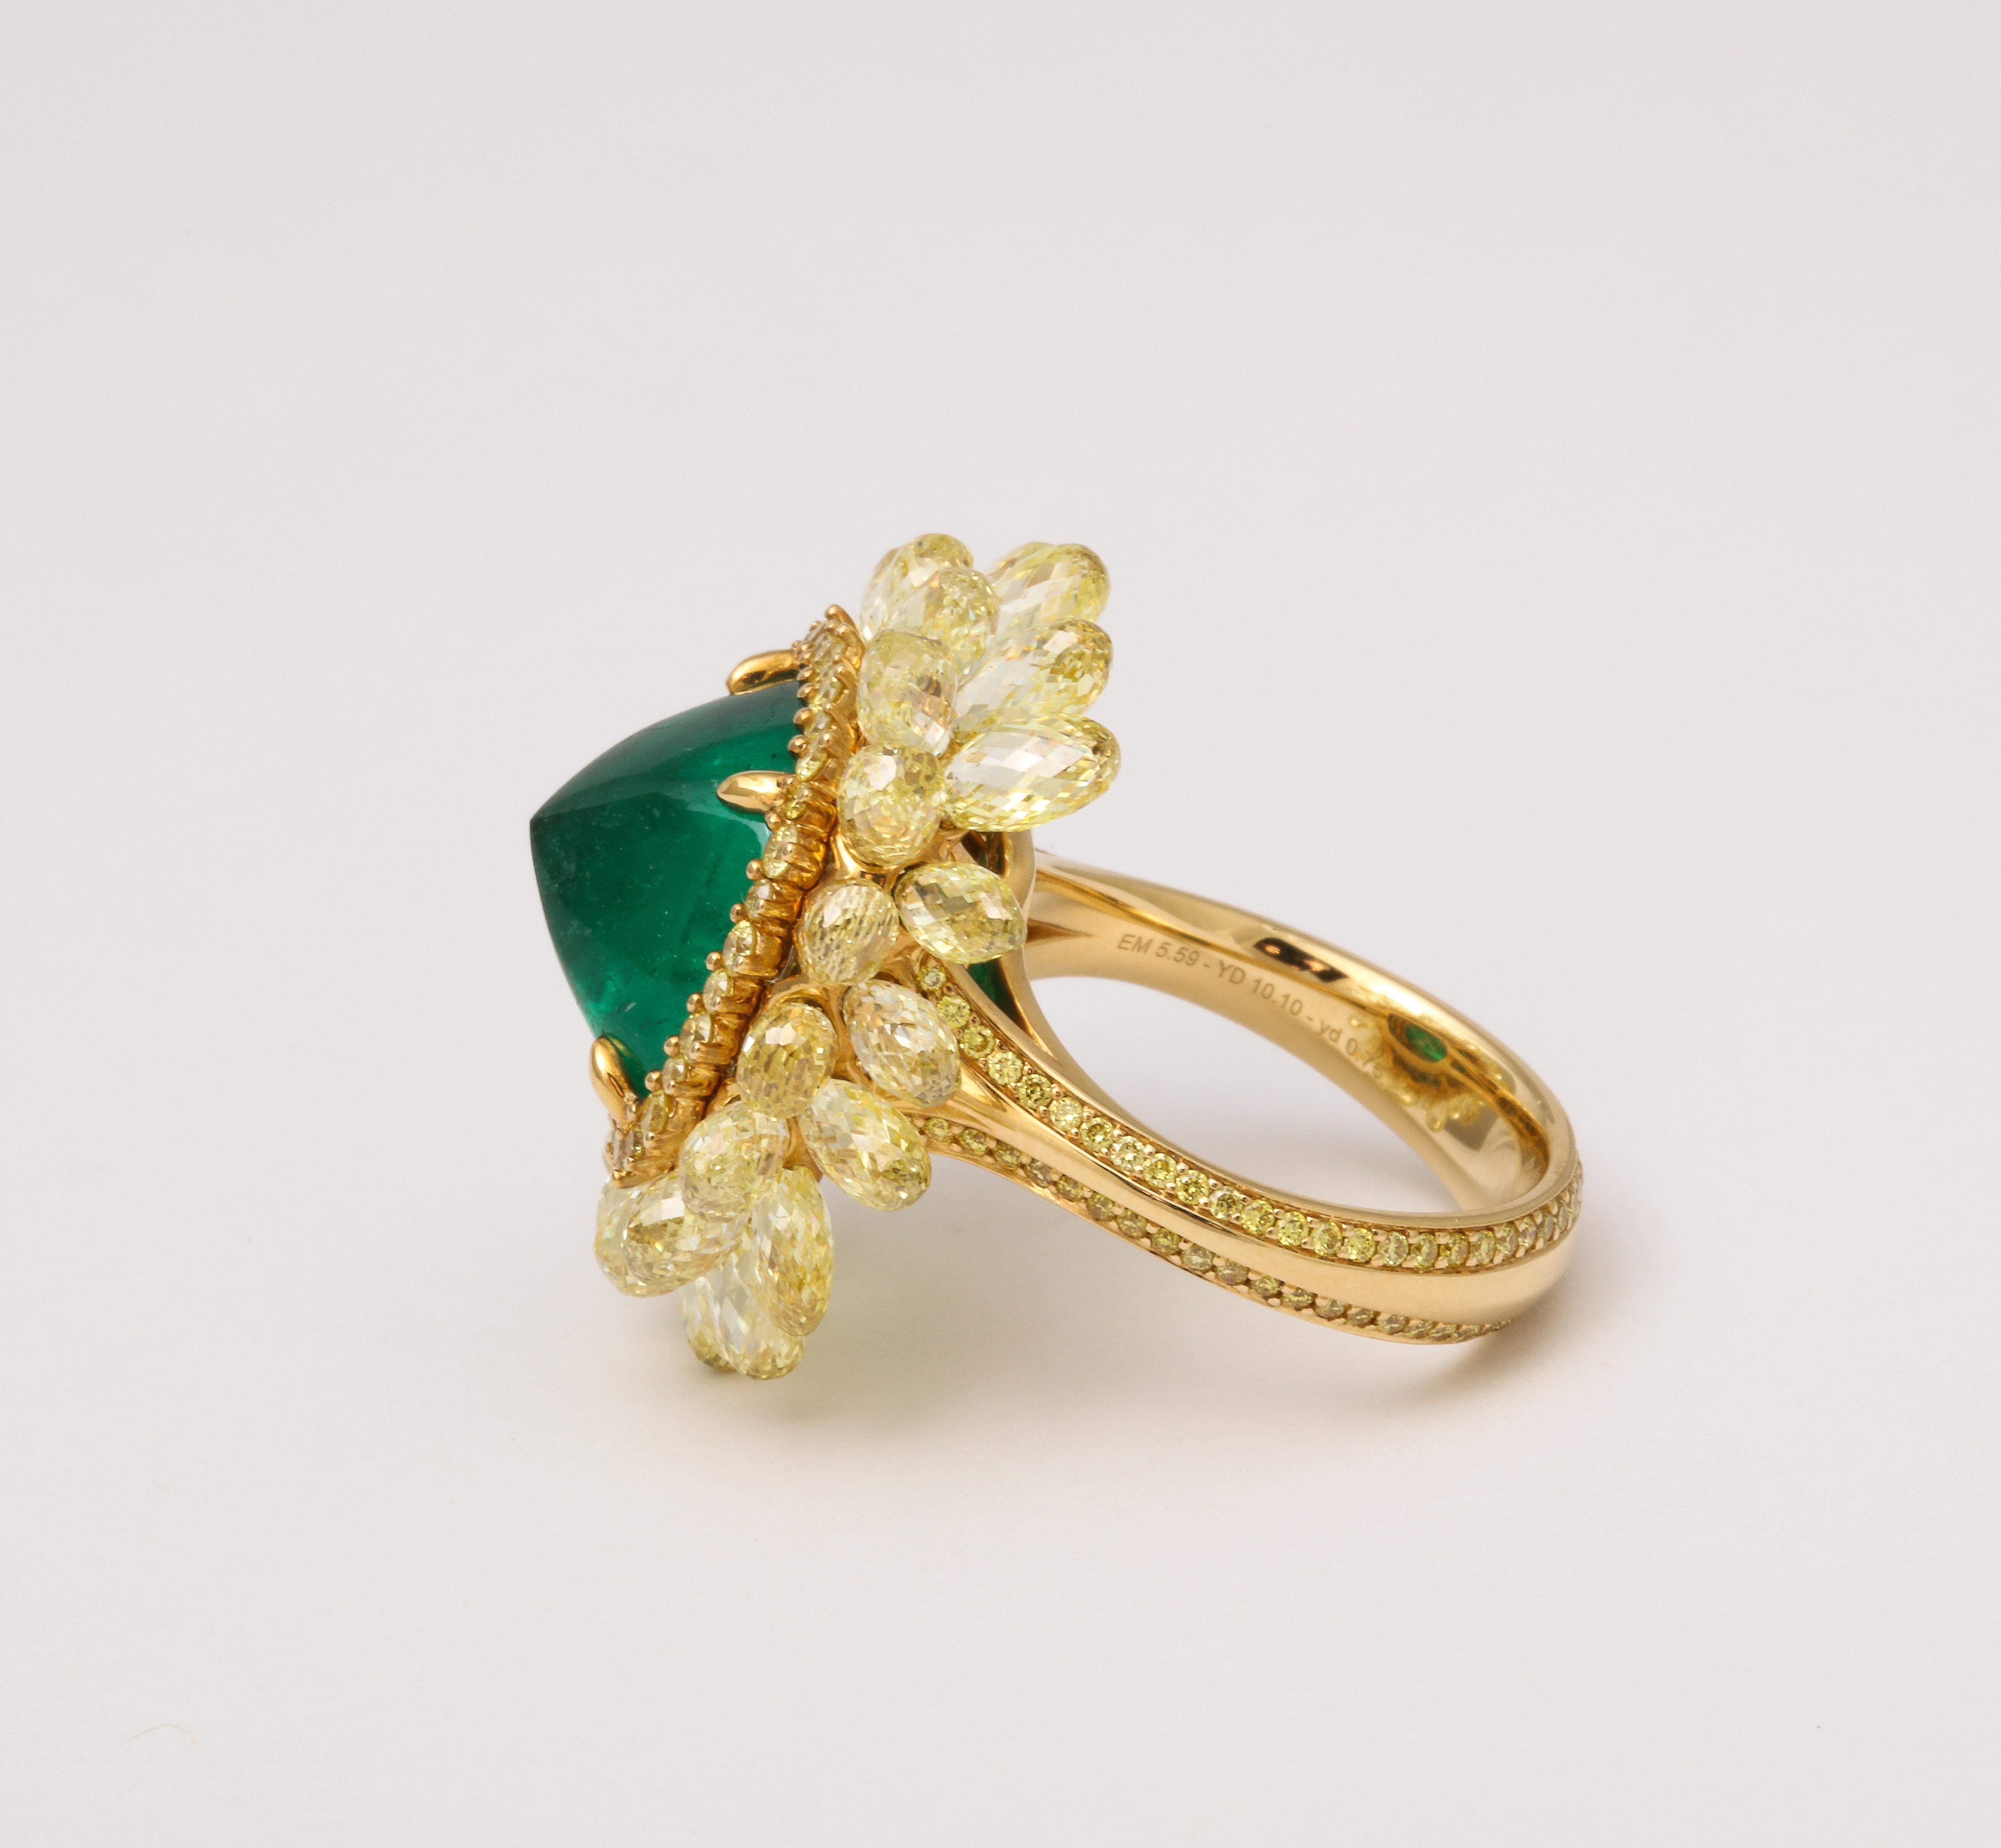 5 carat Sugarloaf Cabochon Emerald and Yellow Diamond Ring For Sale 3